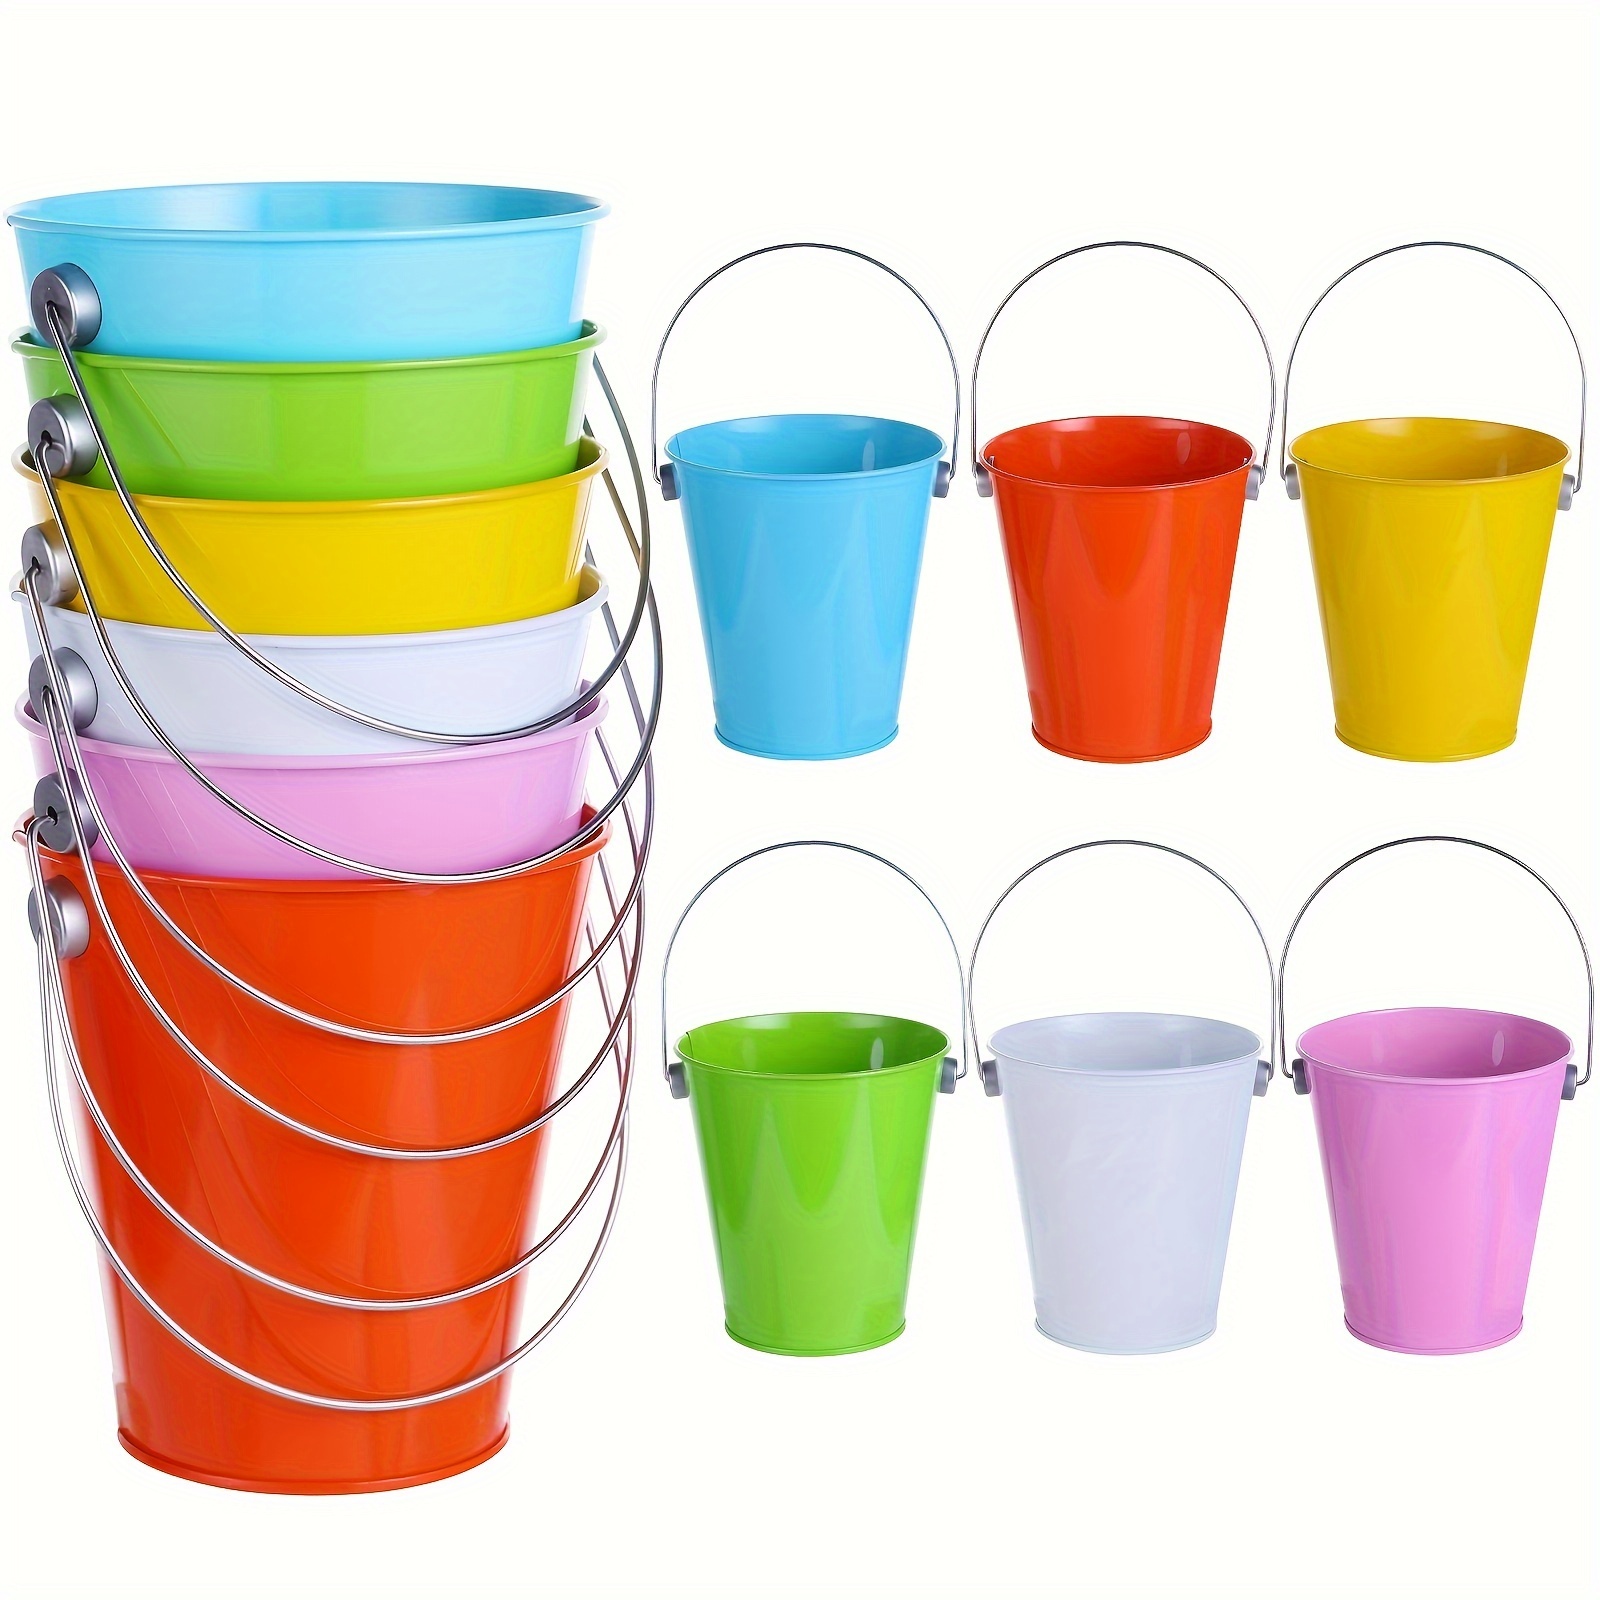 3Pcs 2x2 Small Metal Bucket Colorful Mini Buckets with Handles Red